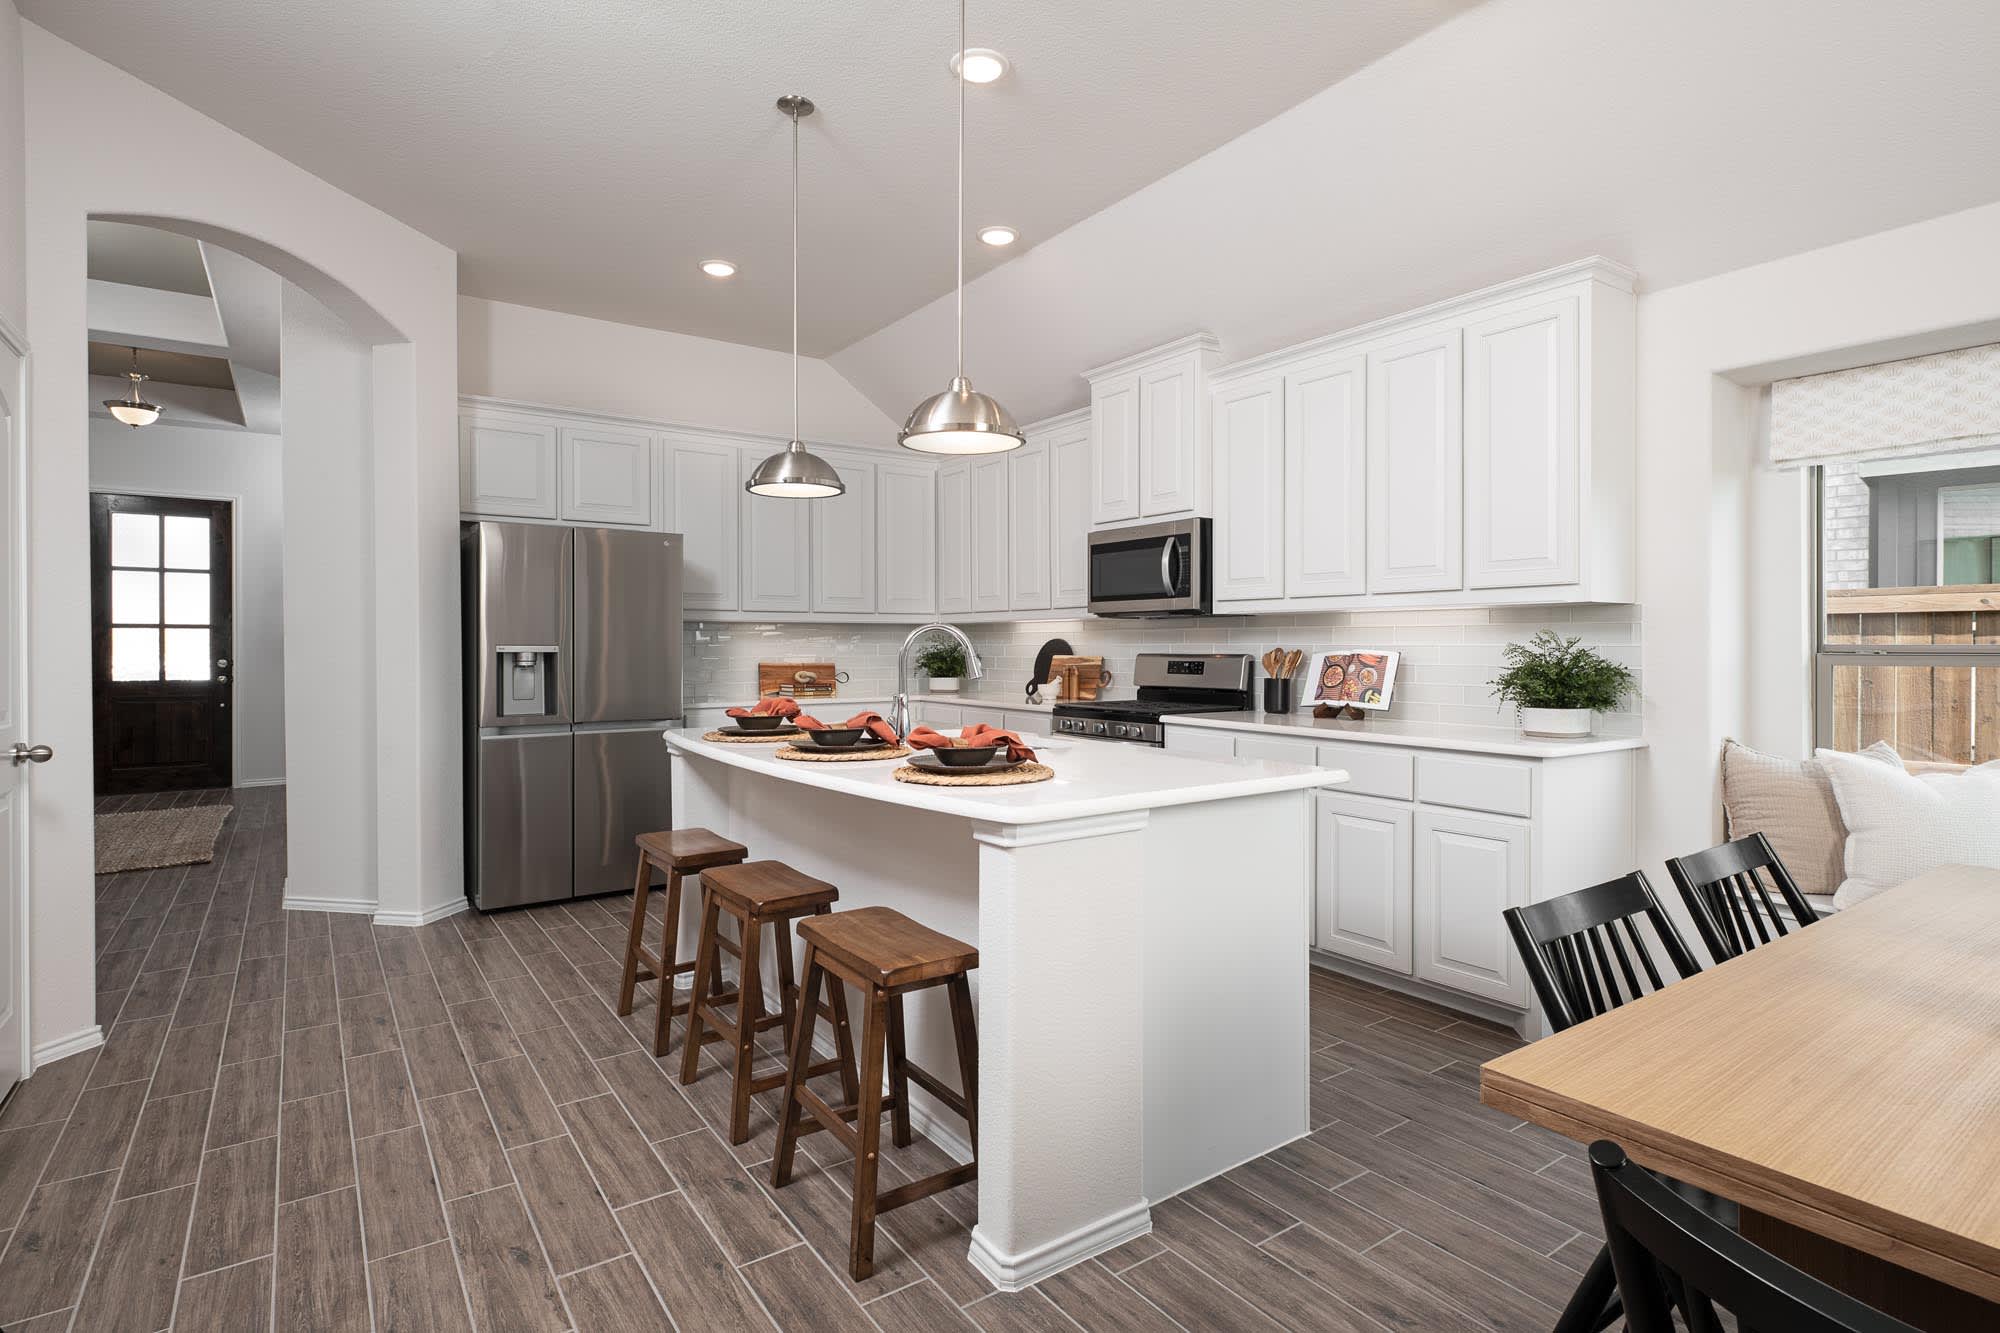 Kitchen | Concept 2186 at Silo Mills - Select Series in Joshua, TX by Landsea Homes